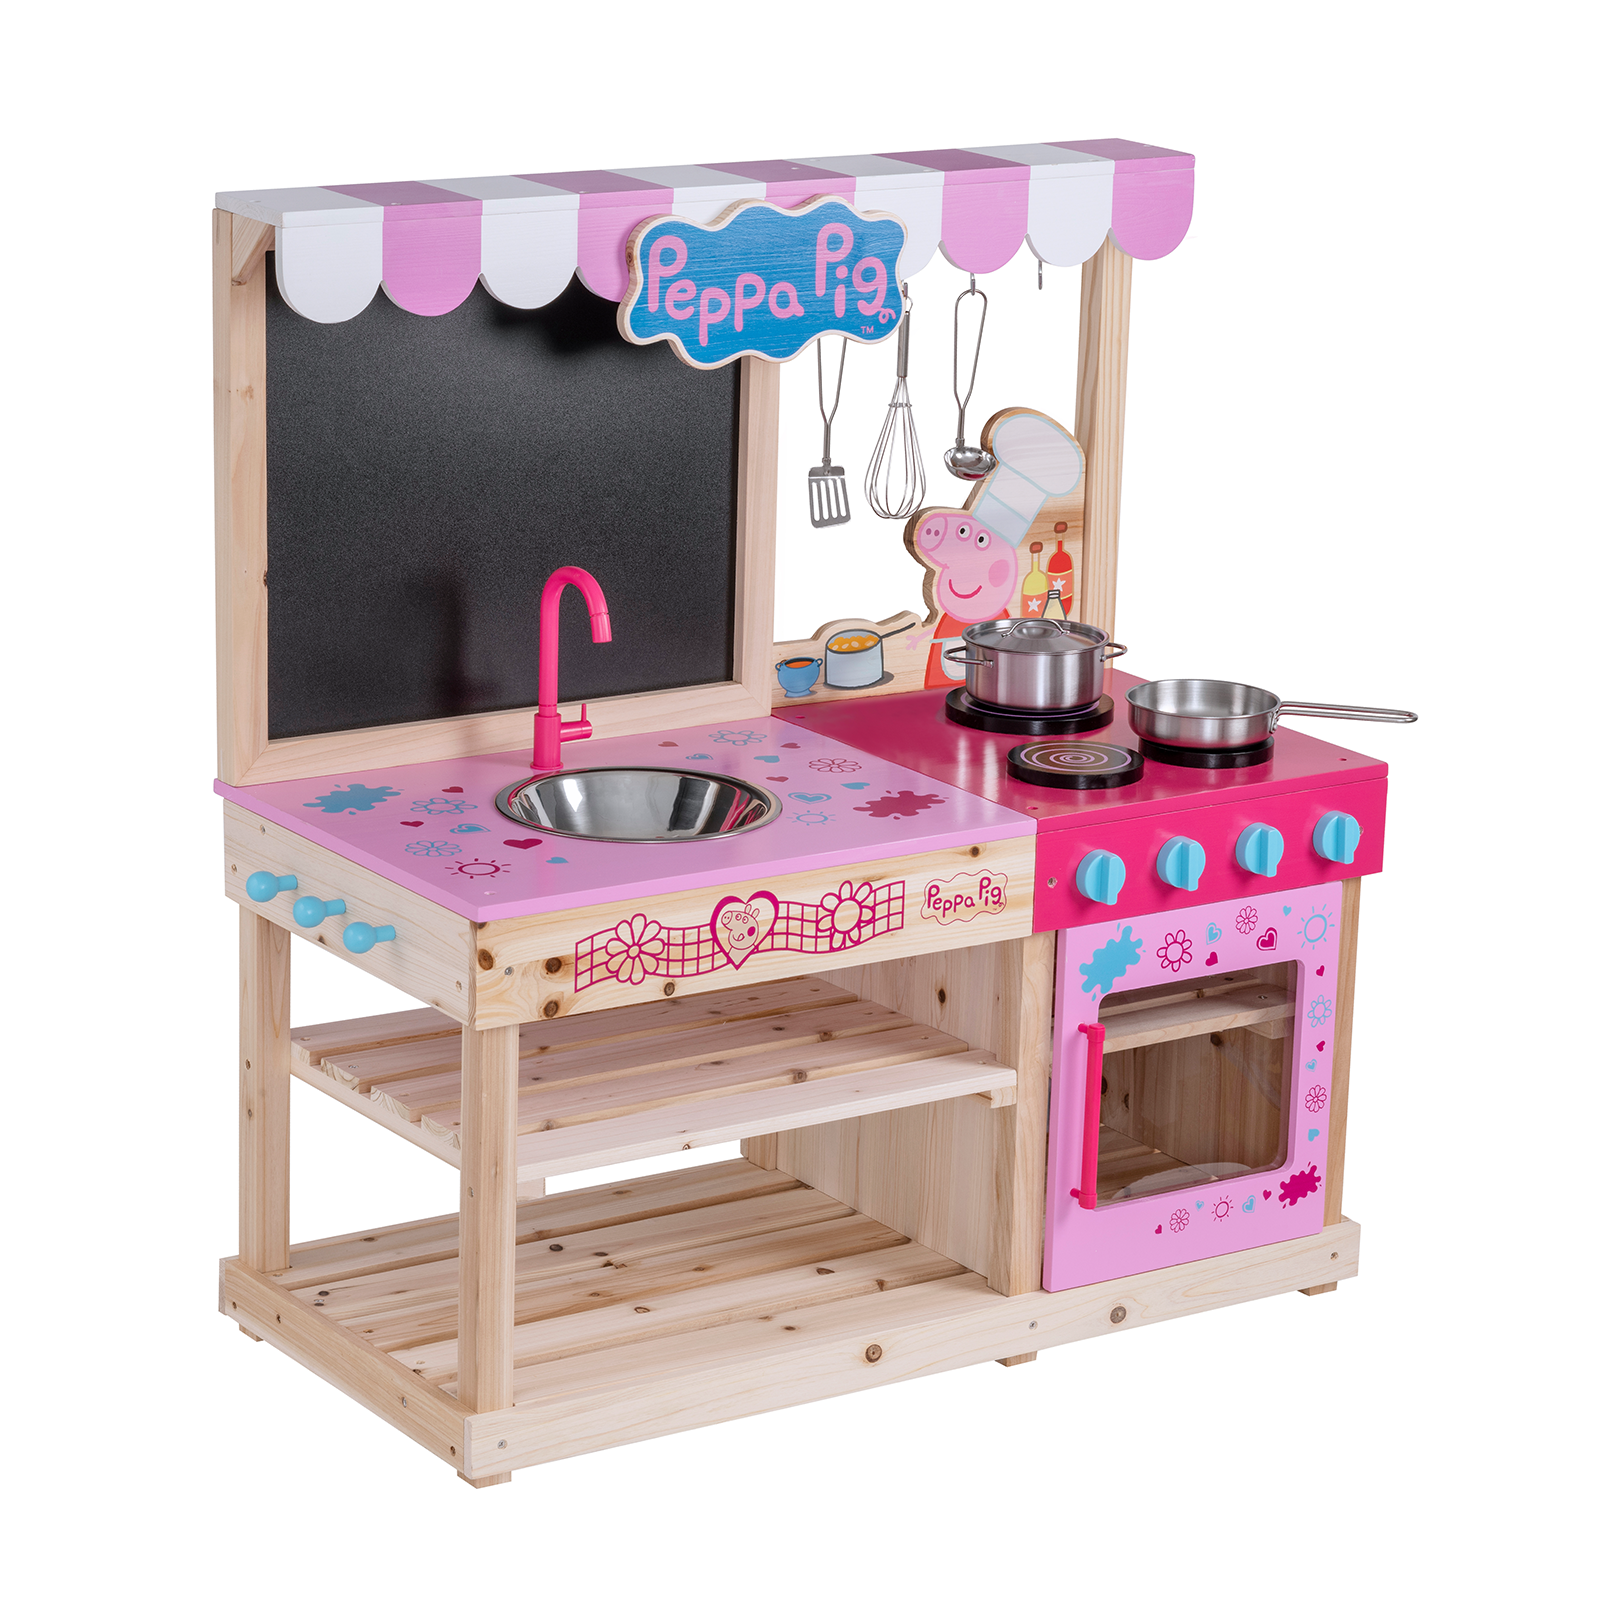 Peppa Pig Wooden Mud Kitchen with Accessories (3 - 6 Years) - Pink